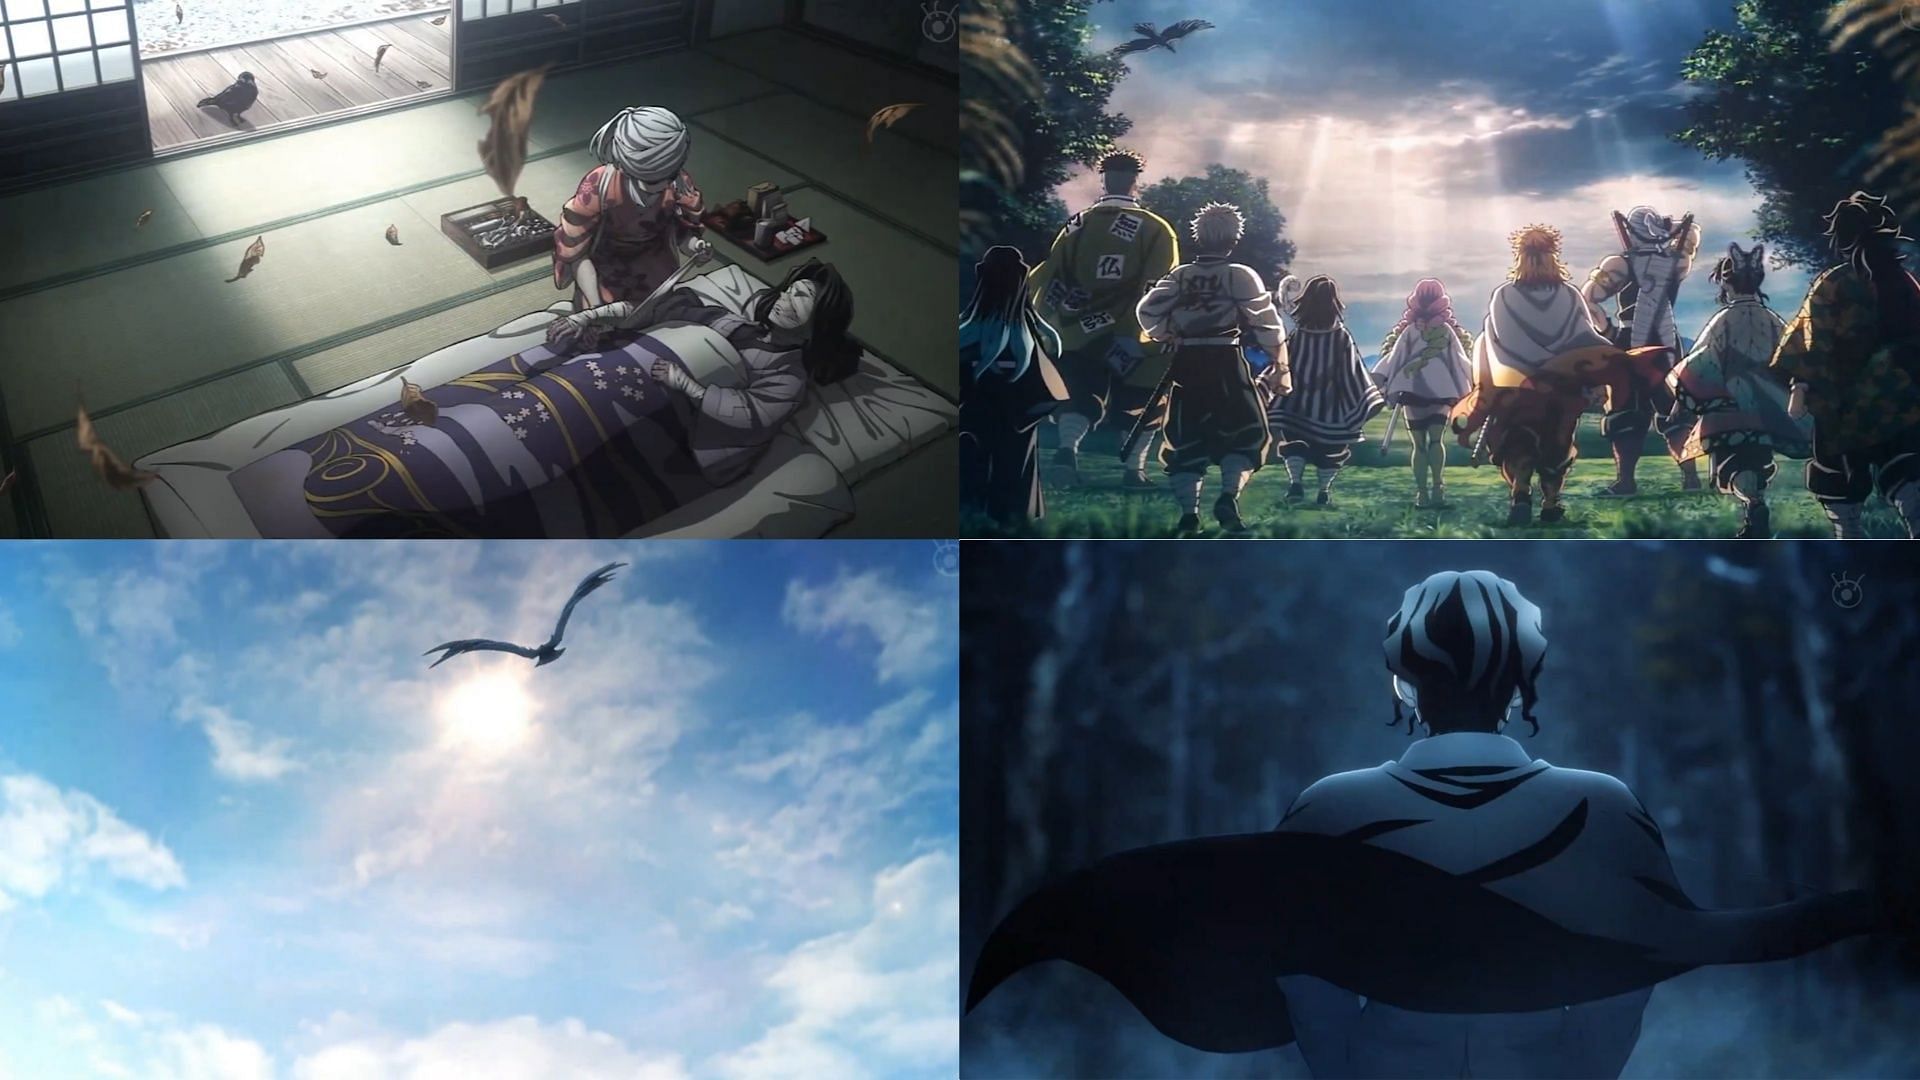 Some of the easter eggs fans might have missed in the Demon Slayer season 4 ending (Image via Ufotable)